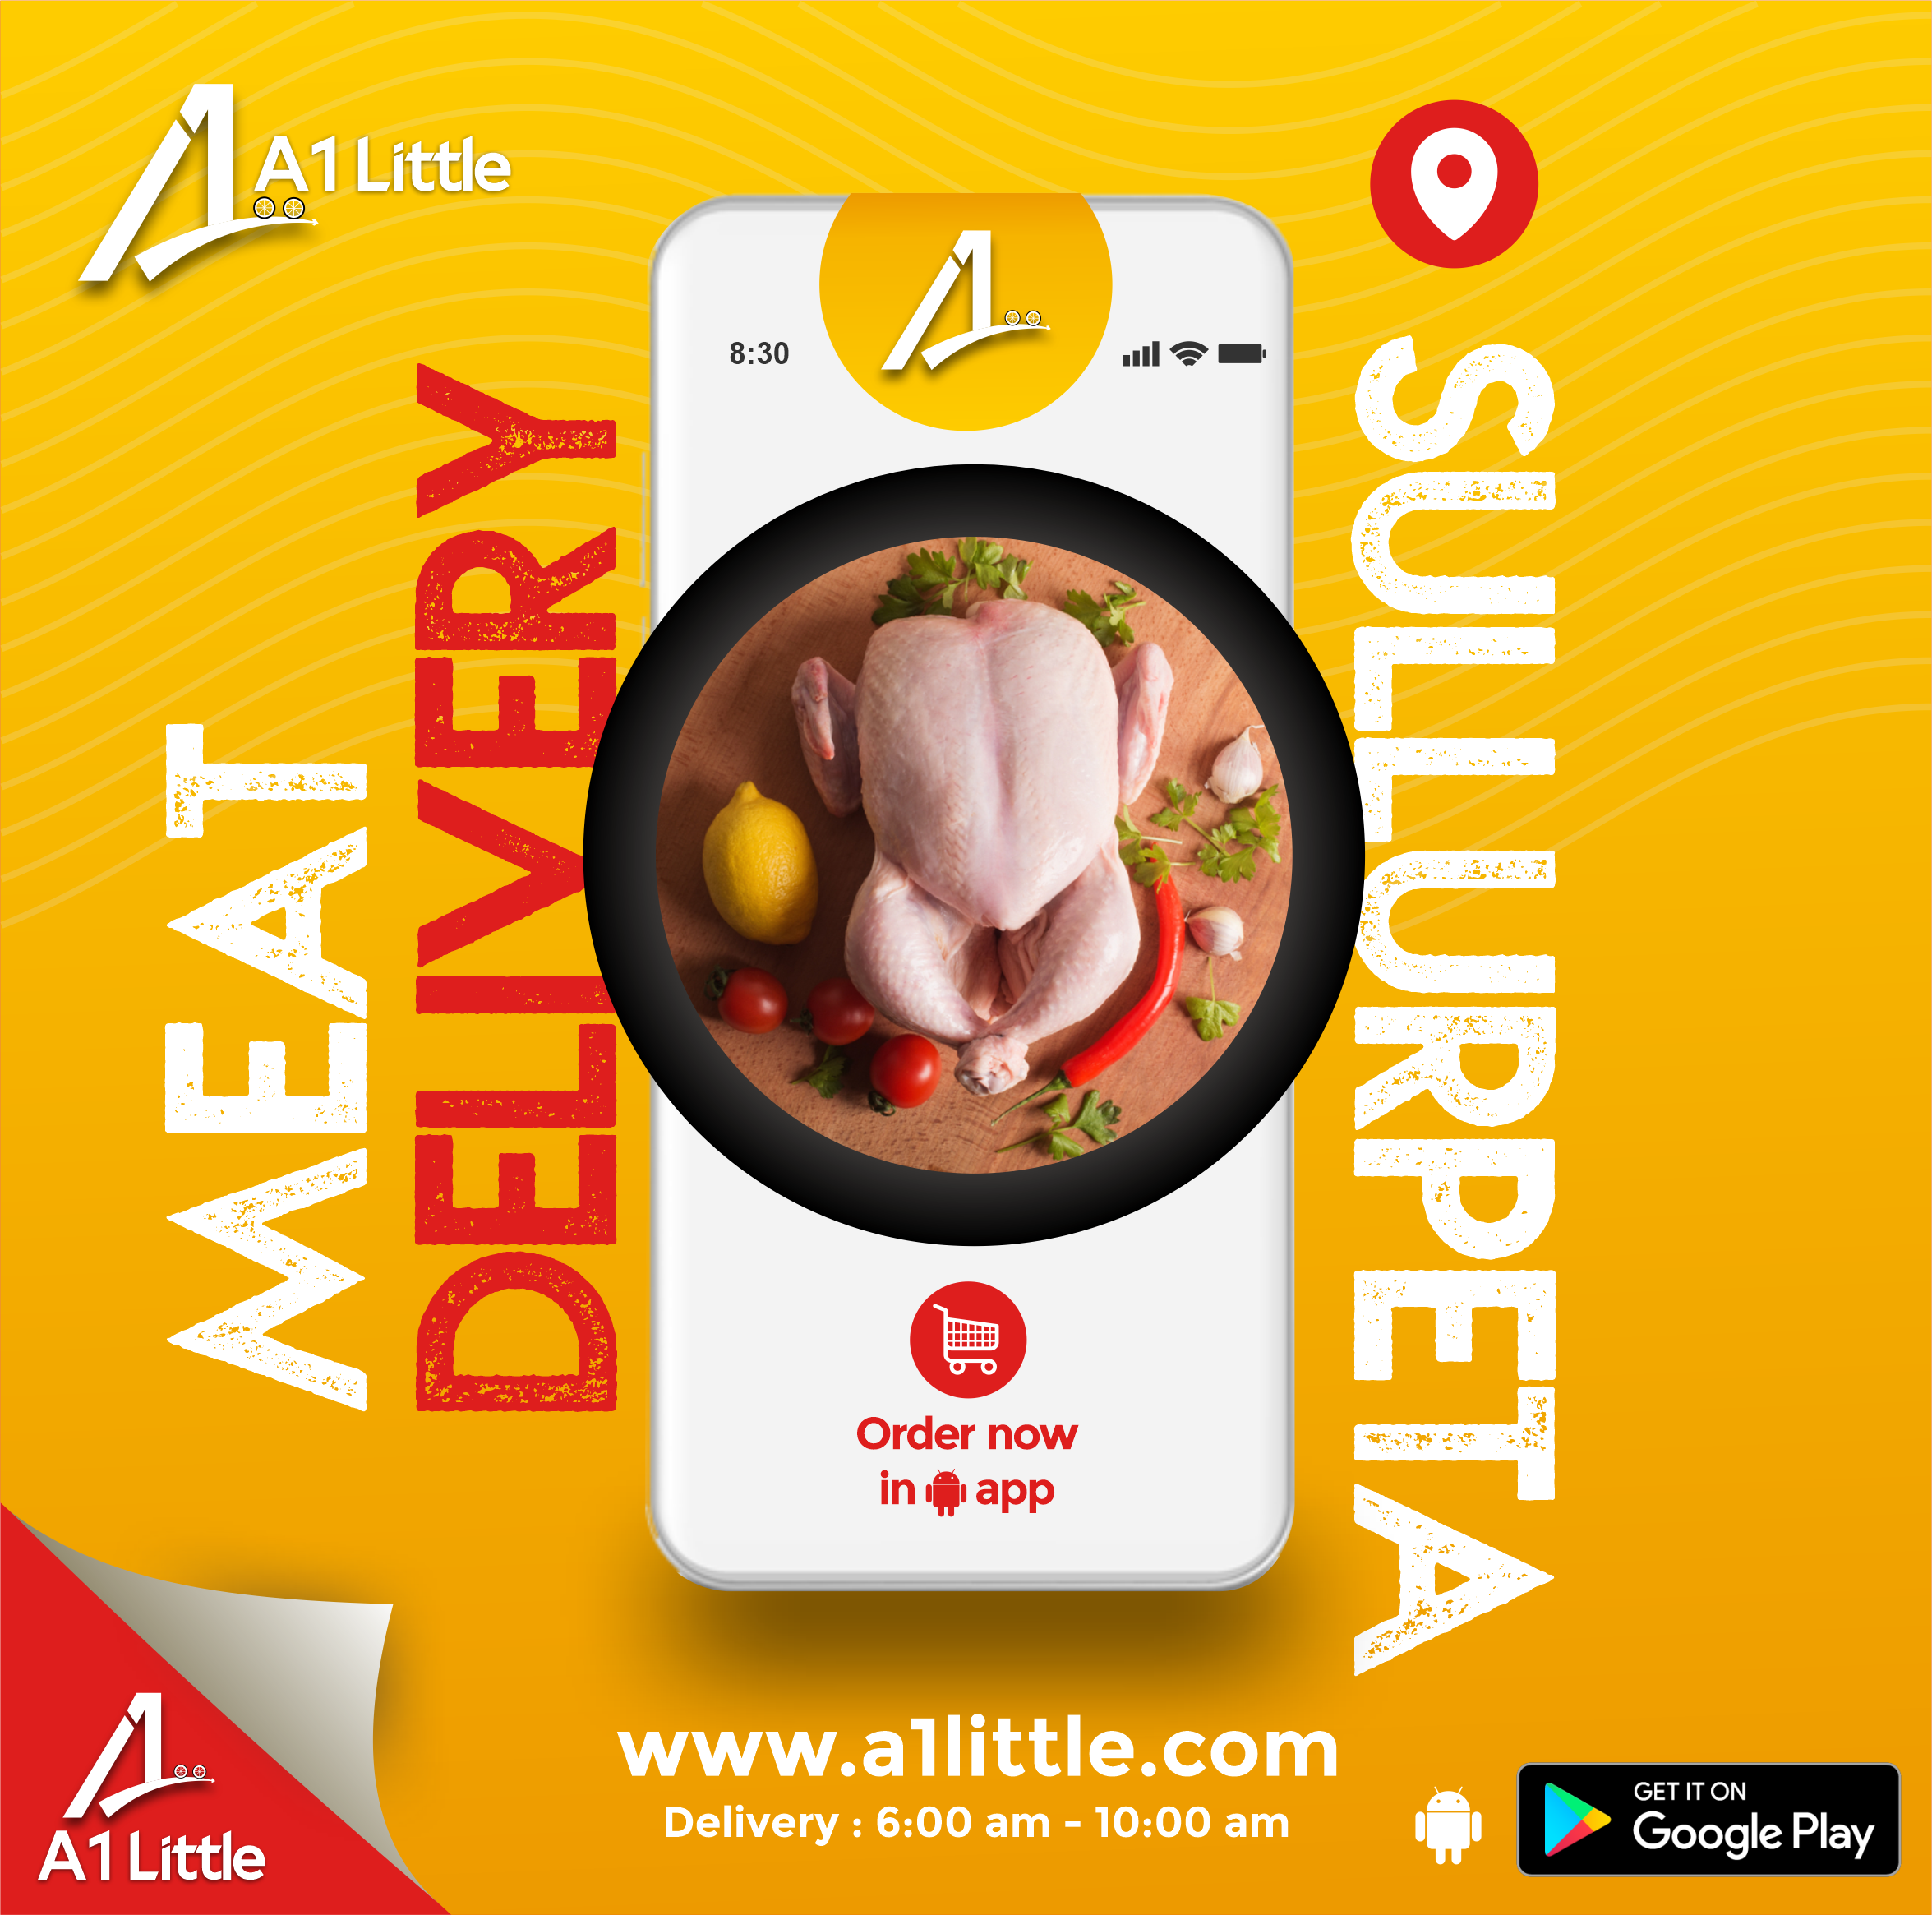 <b> A1 Little social media banner, it is a online meat delivery app  </b> 